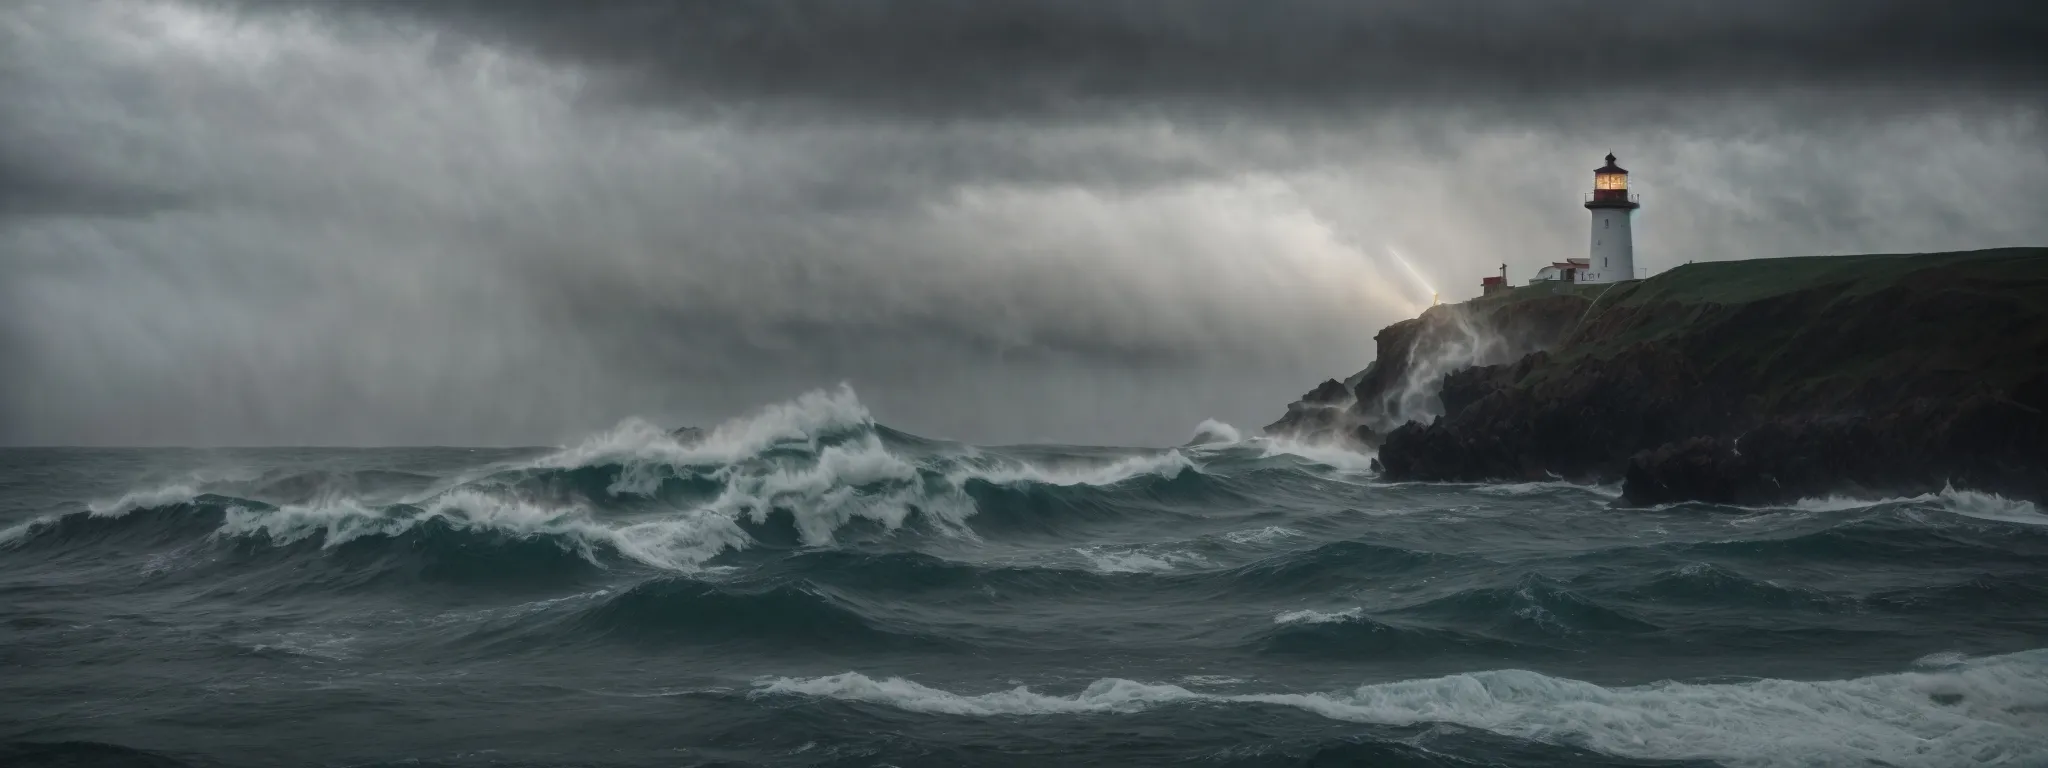 a lighthouse casting a beam across stormy seas, symbolizing guidance and safe navigation in a volatile environment.